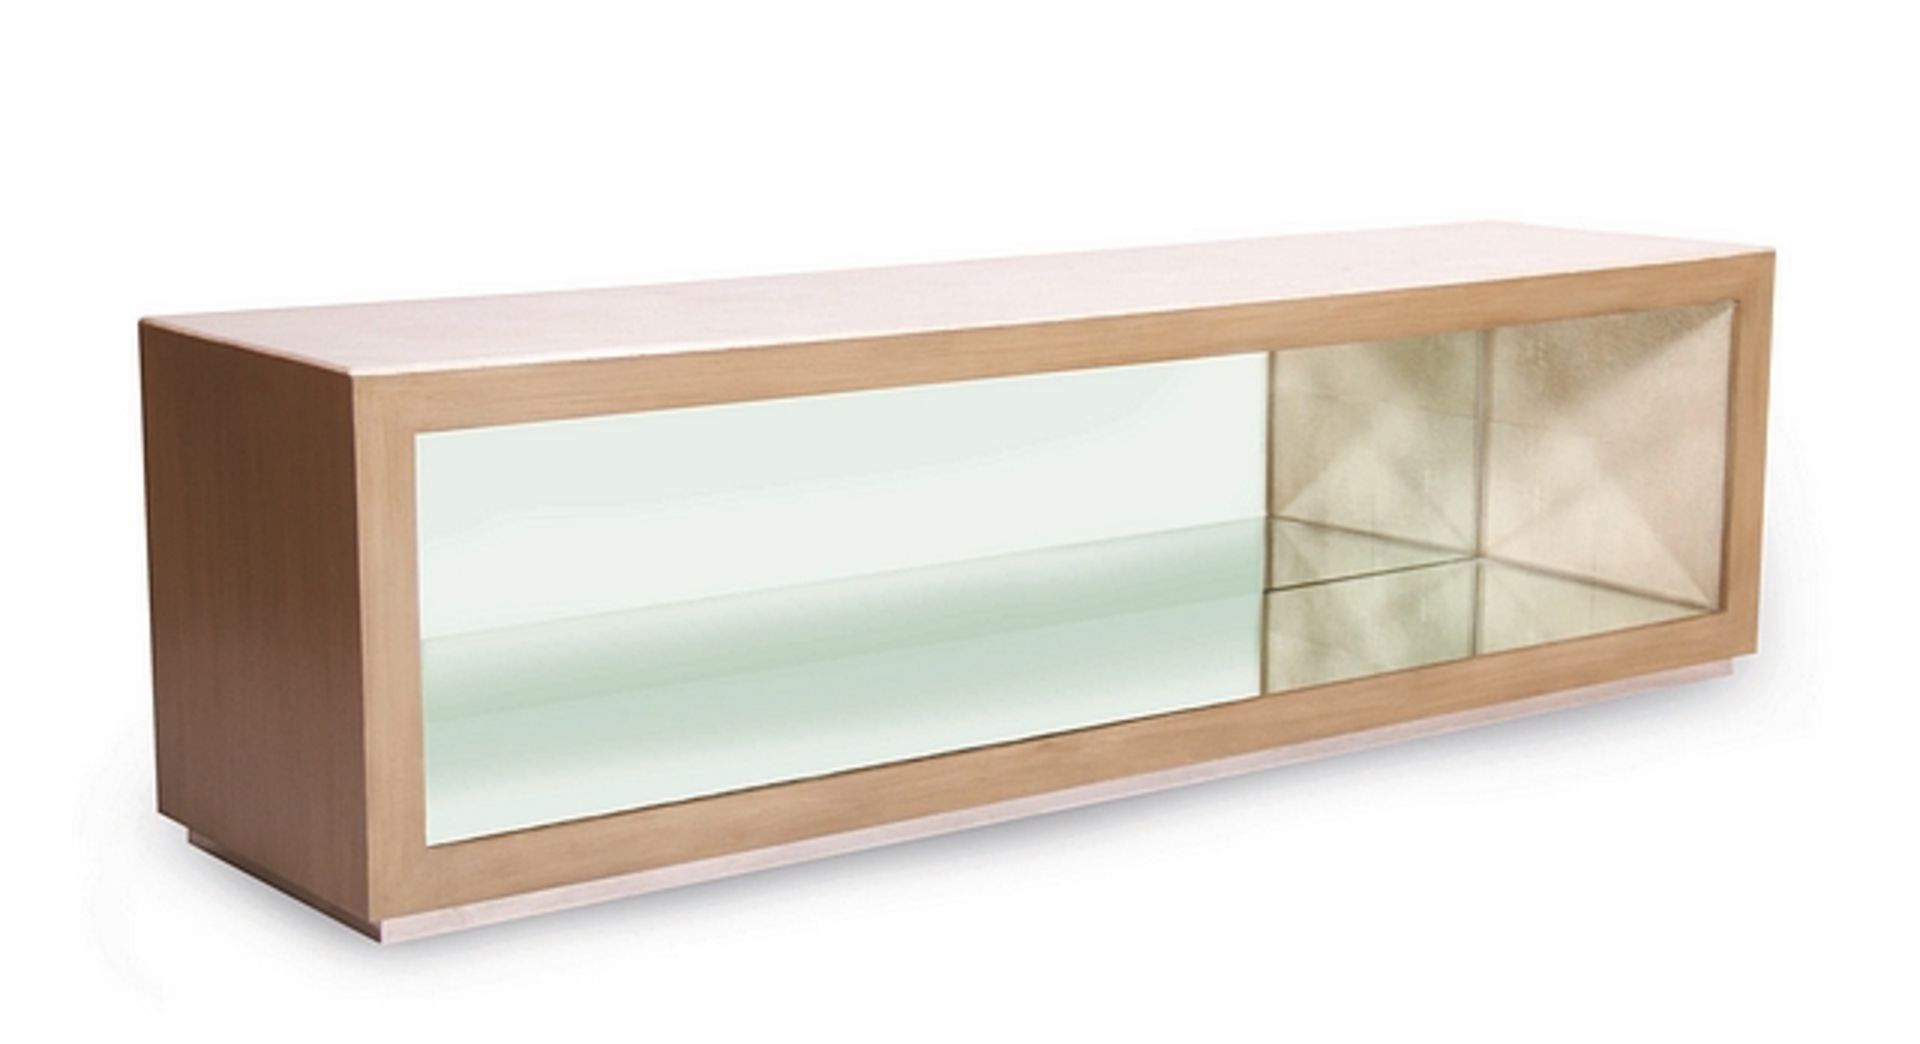 Mirror. Box mirror in neutral and serene tones of pine, enabling light to enter the room and